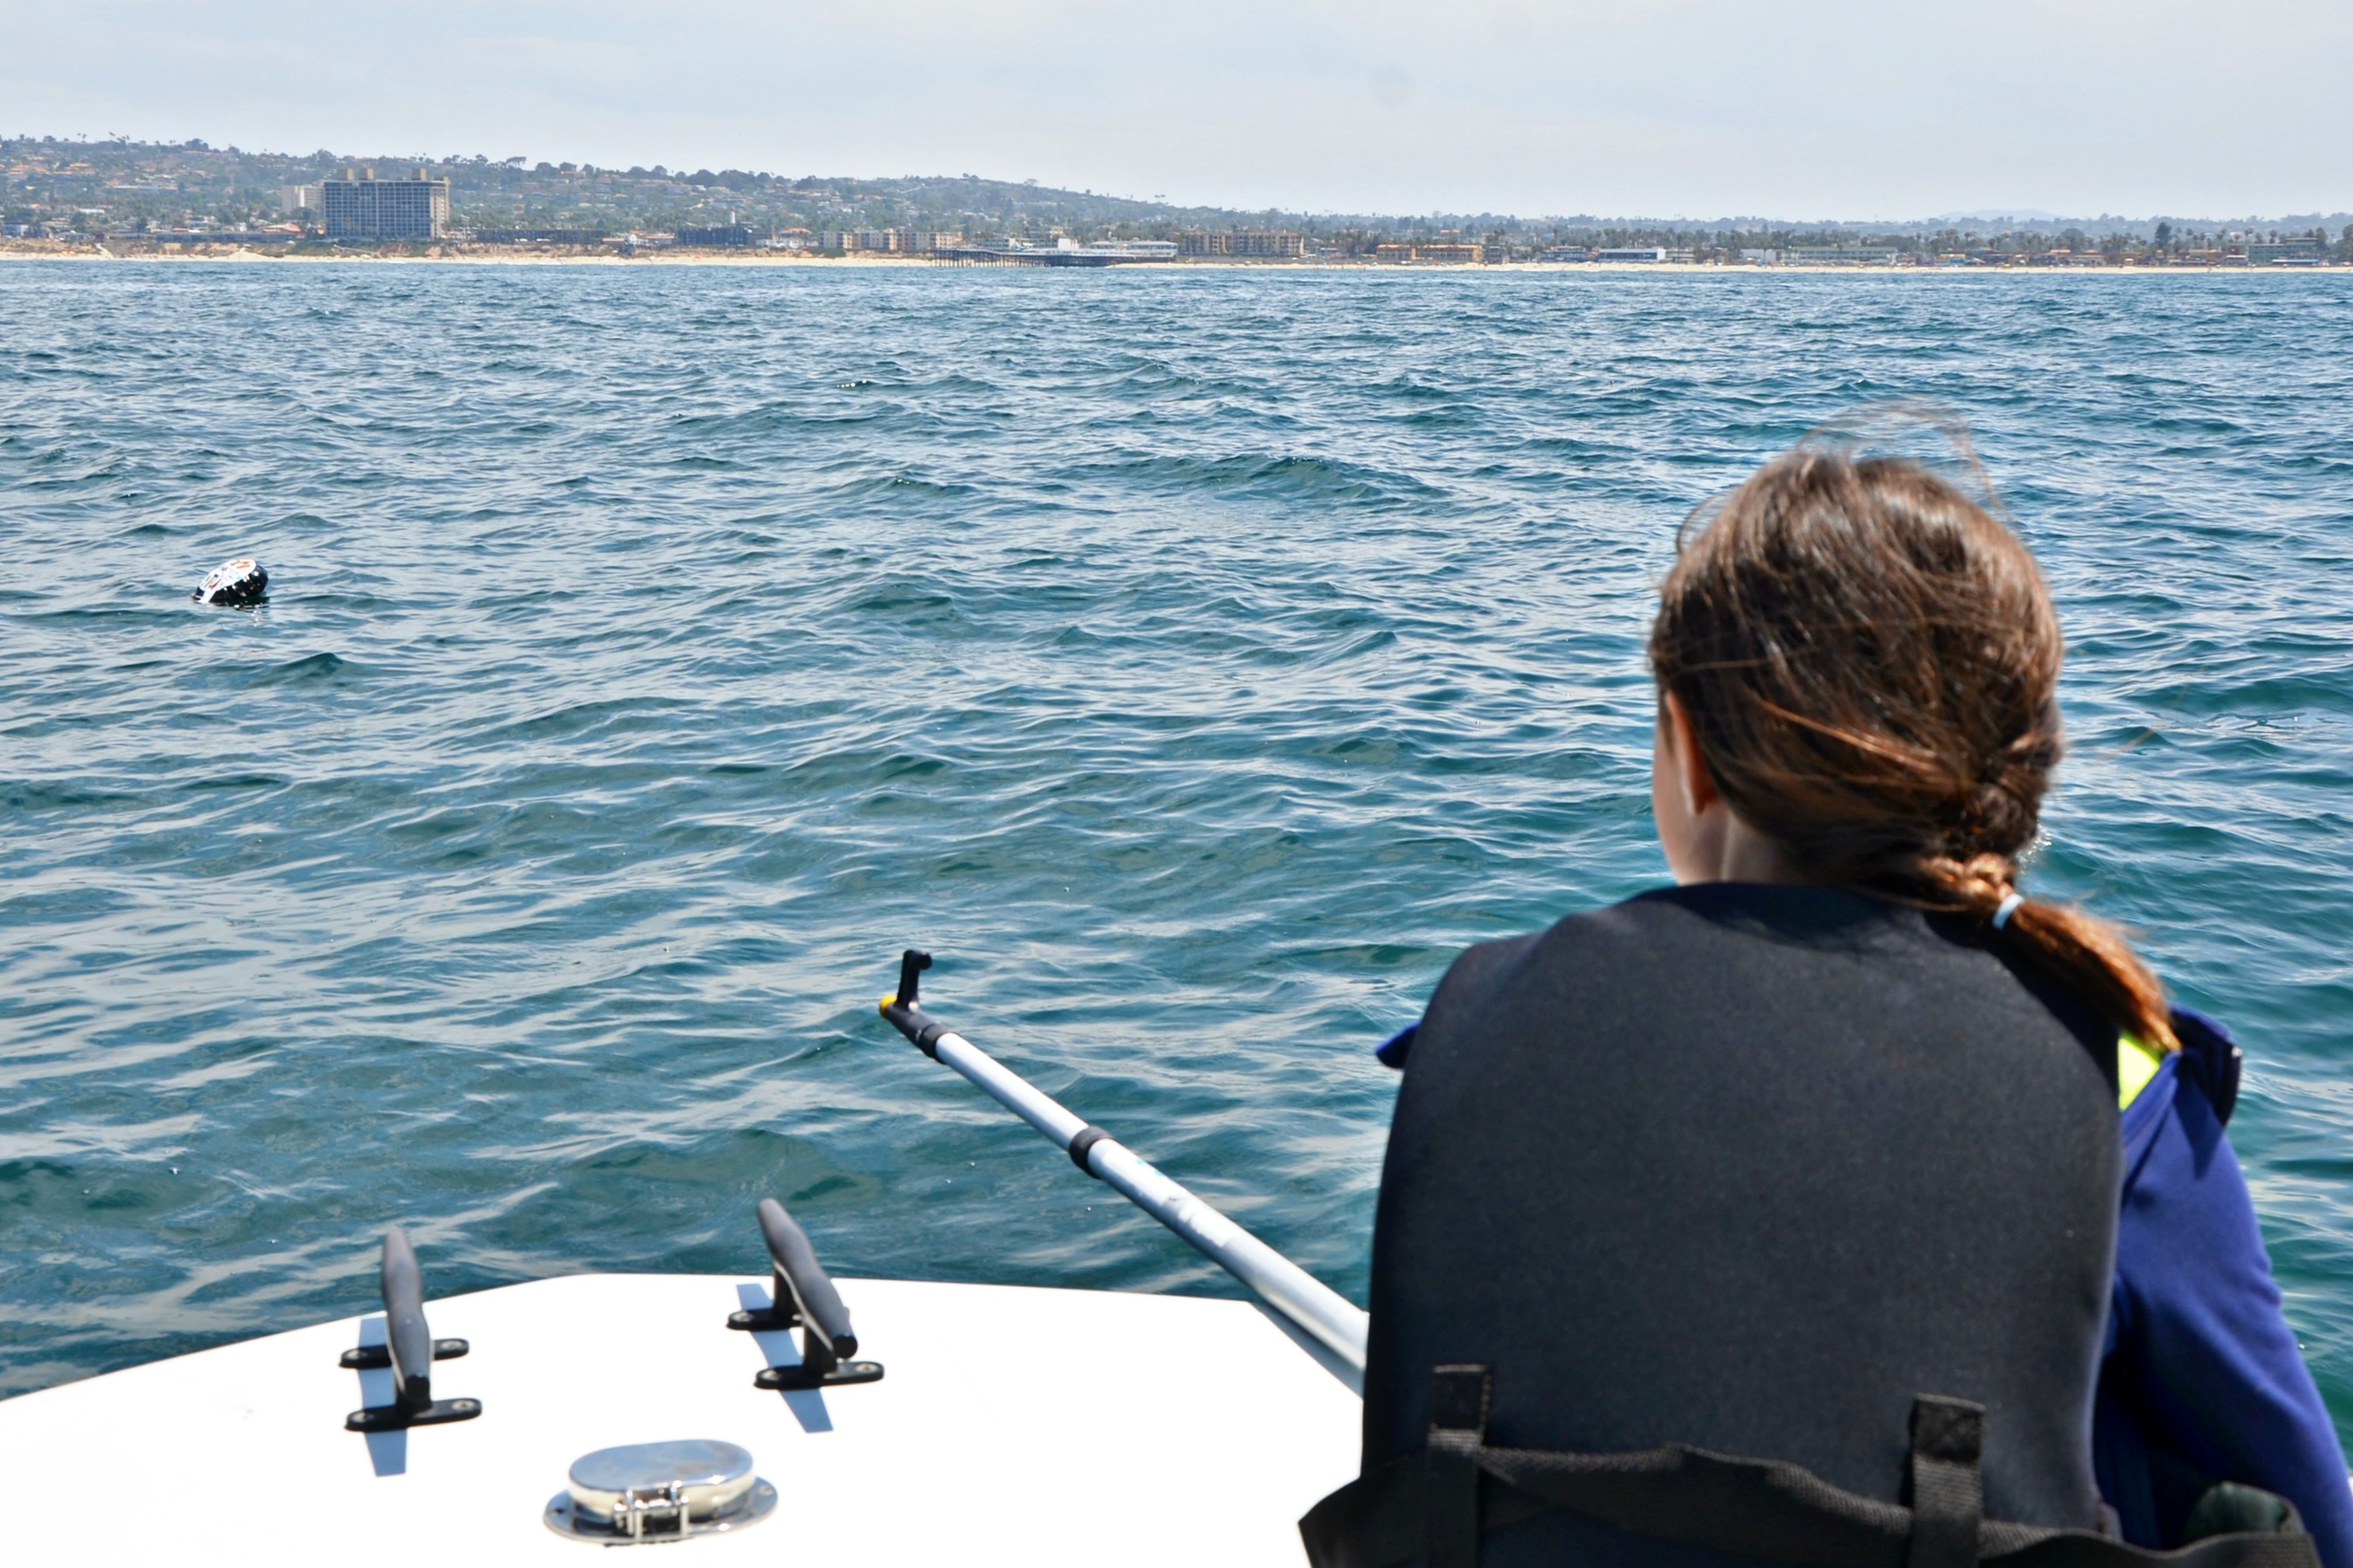 Do you know how far your trash goes to end up in the ocean? As the SeaWorld guest kid blogger, my daughter has had great learning opportunities. Our boat return experience on a SeaWorld animal return with sea lions and elephant seals was remarkable.